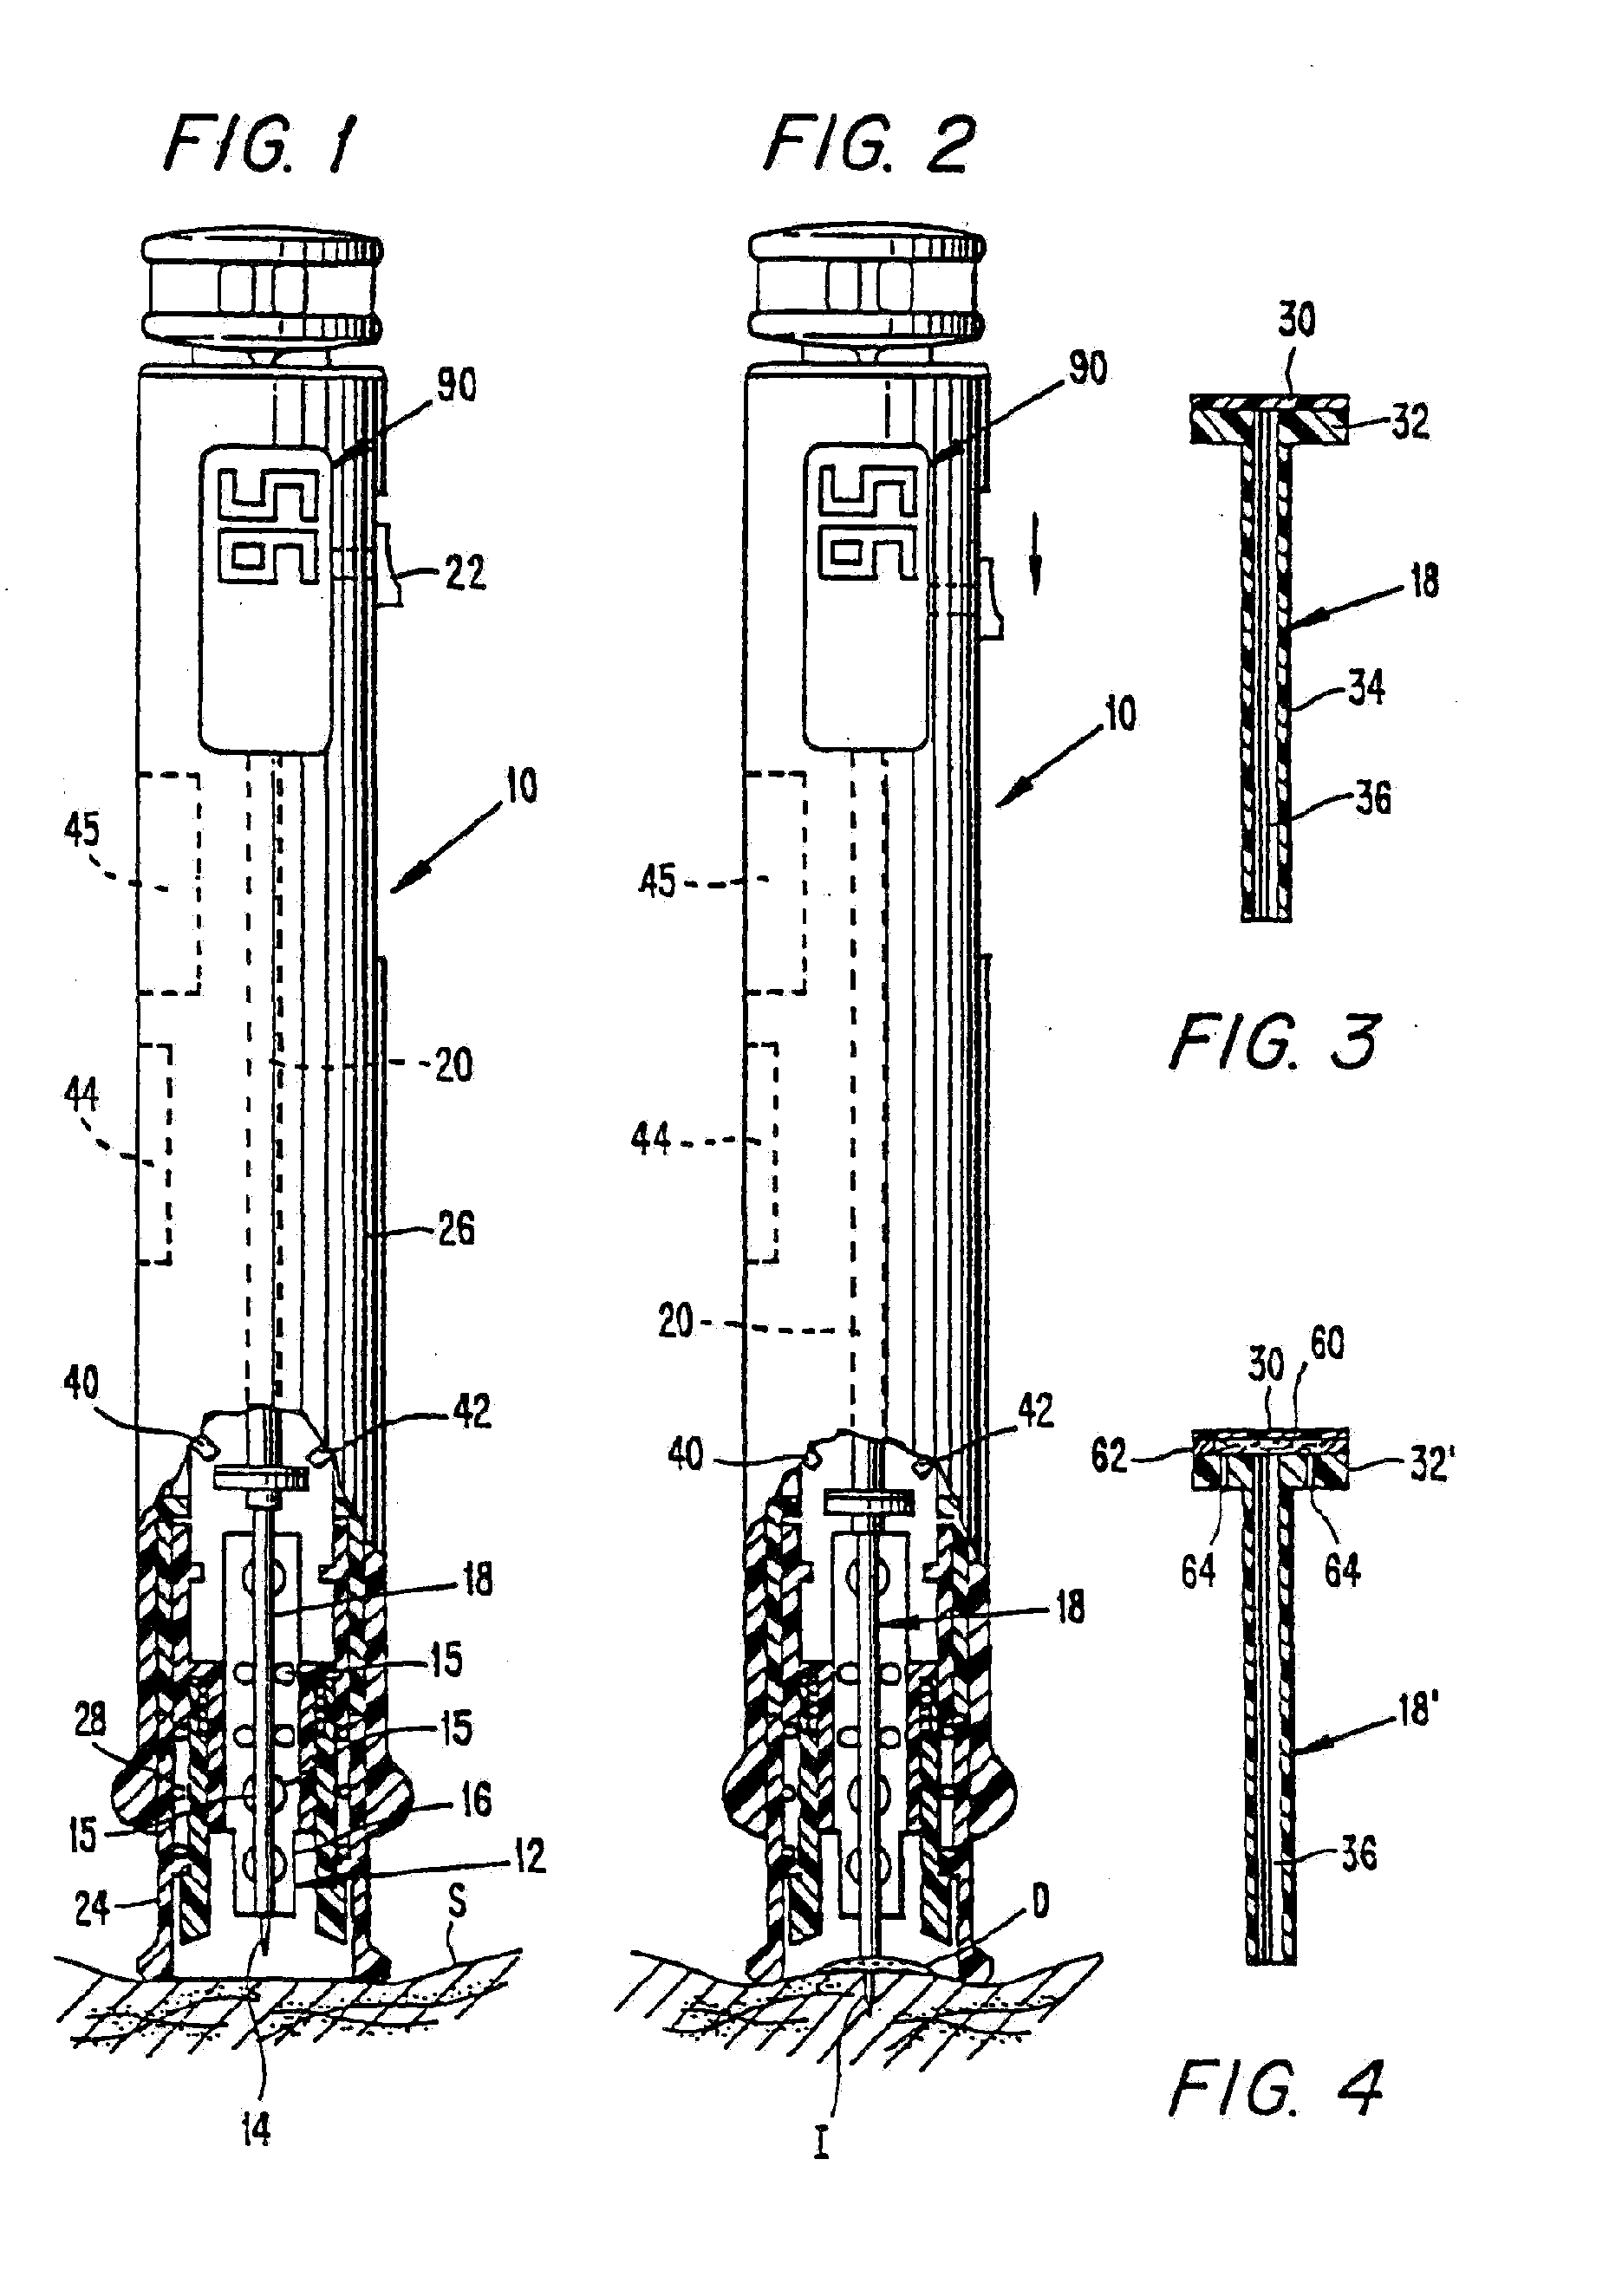 Methods and apparatus for sampling and analyzing body fluid